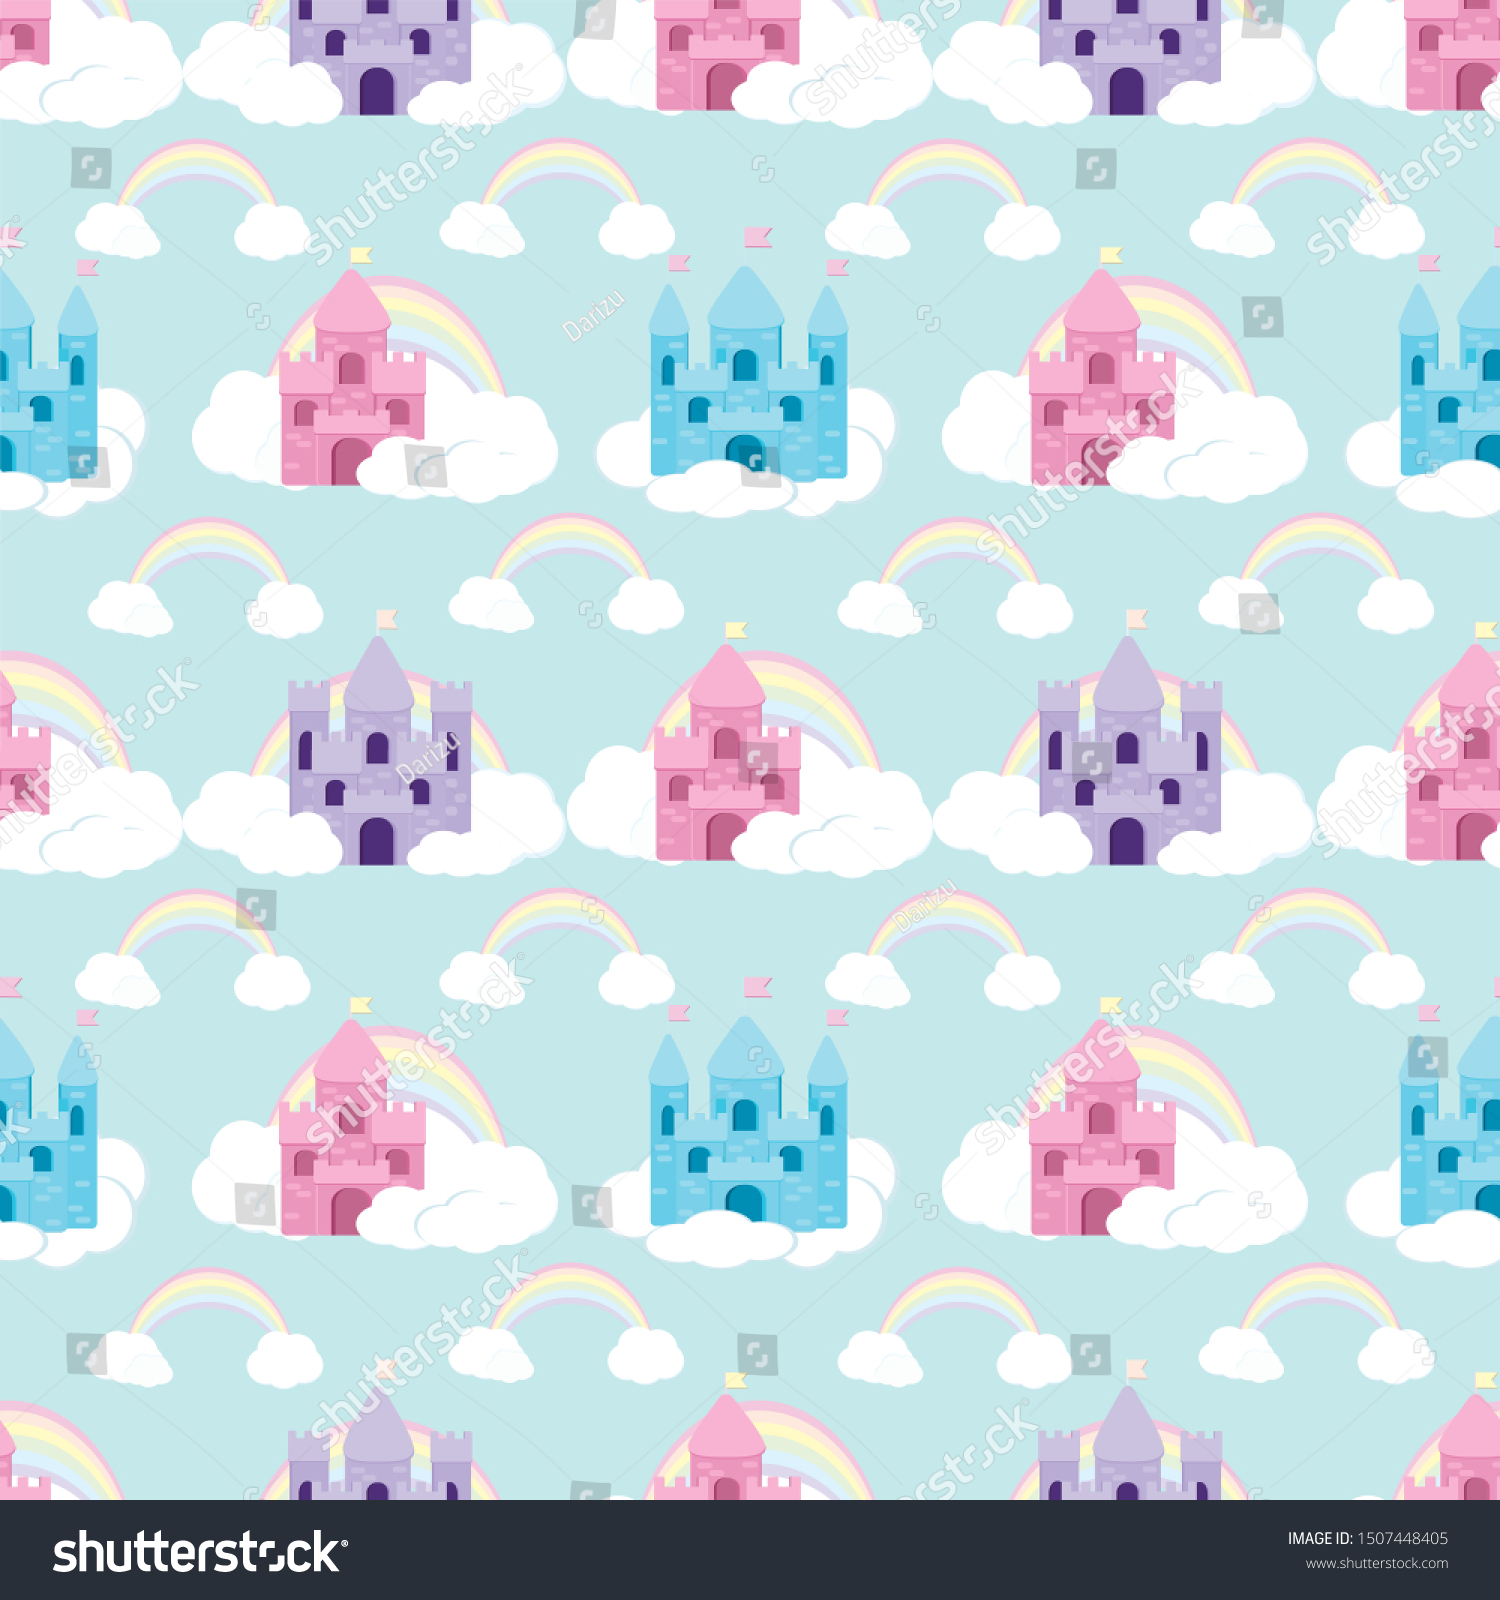 SVG of Cute fairytale pattern with castles svg